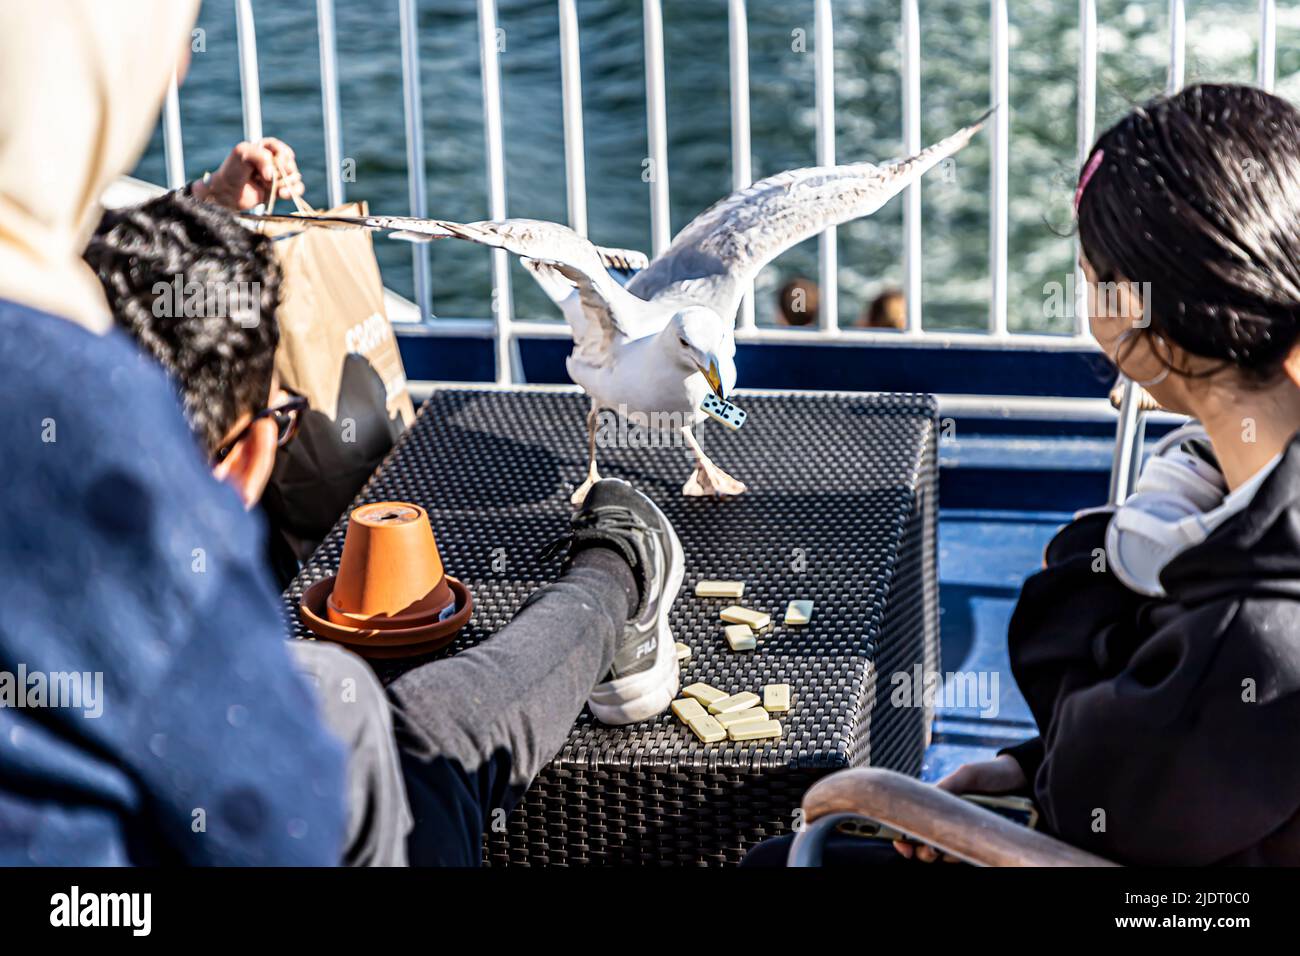 Gull snatching a domino tile from passengers playing at a table on the deck of a cruiseferry. One of the passengers is trying to fend off the bird. Stock Photo